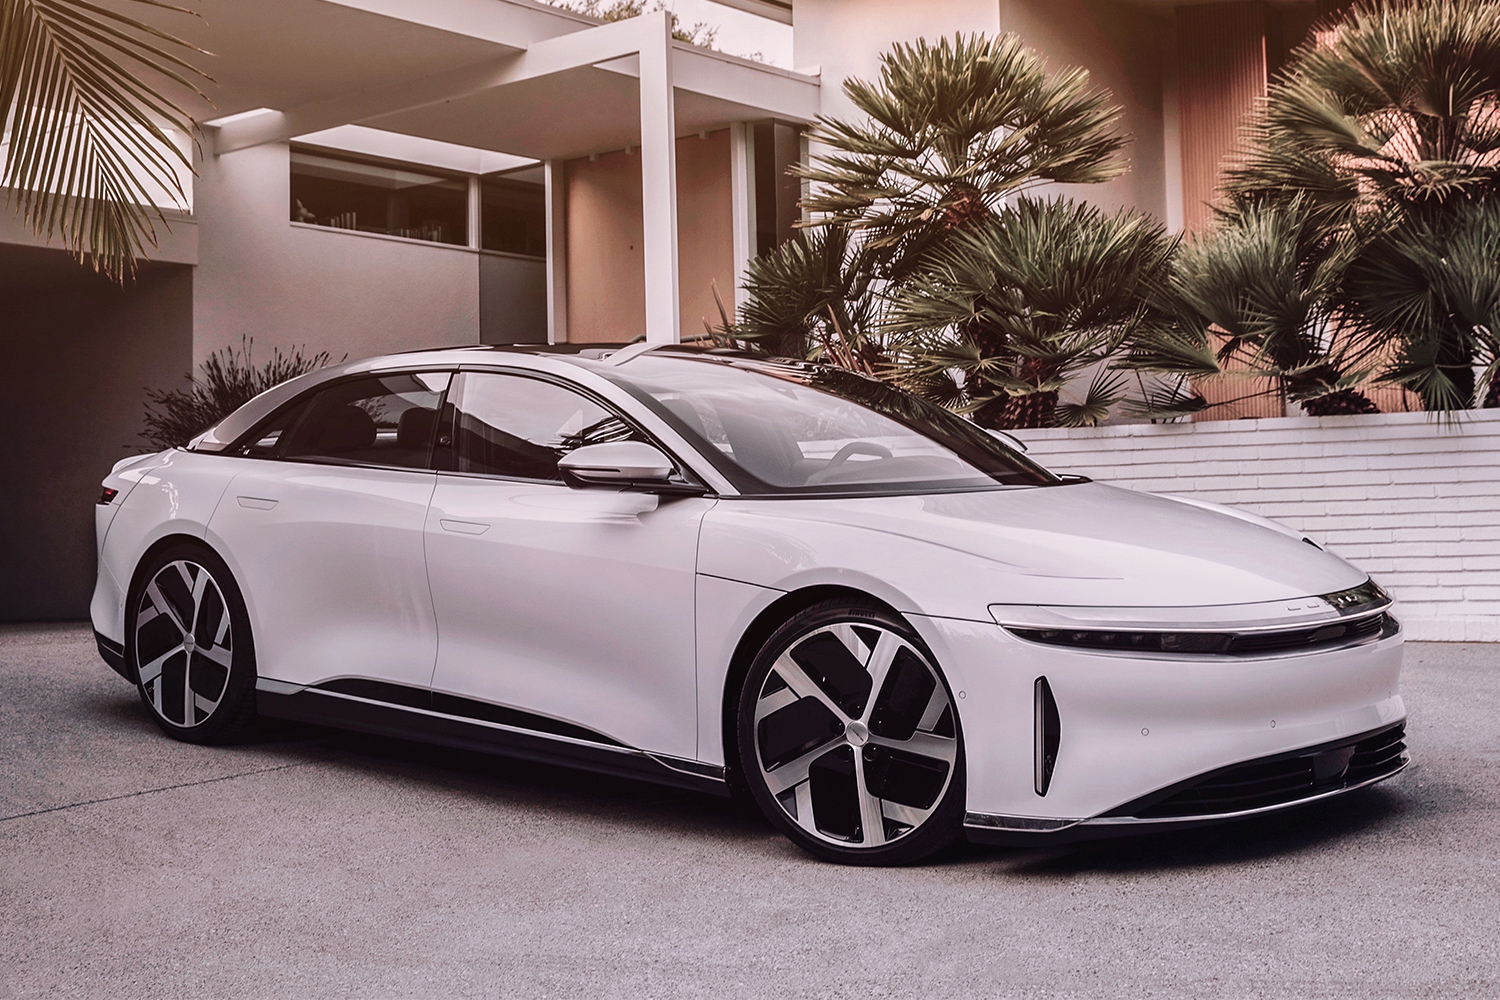 The new Lucid Air electric sedan in white from Lucid Motors